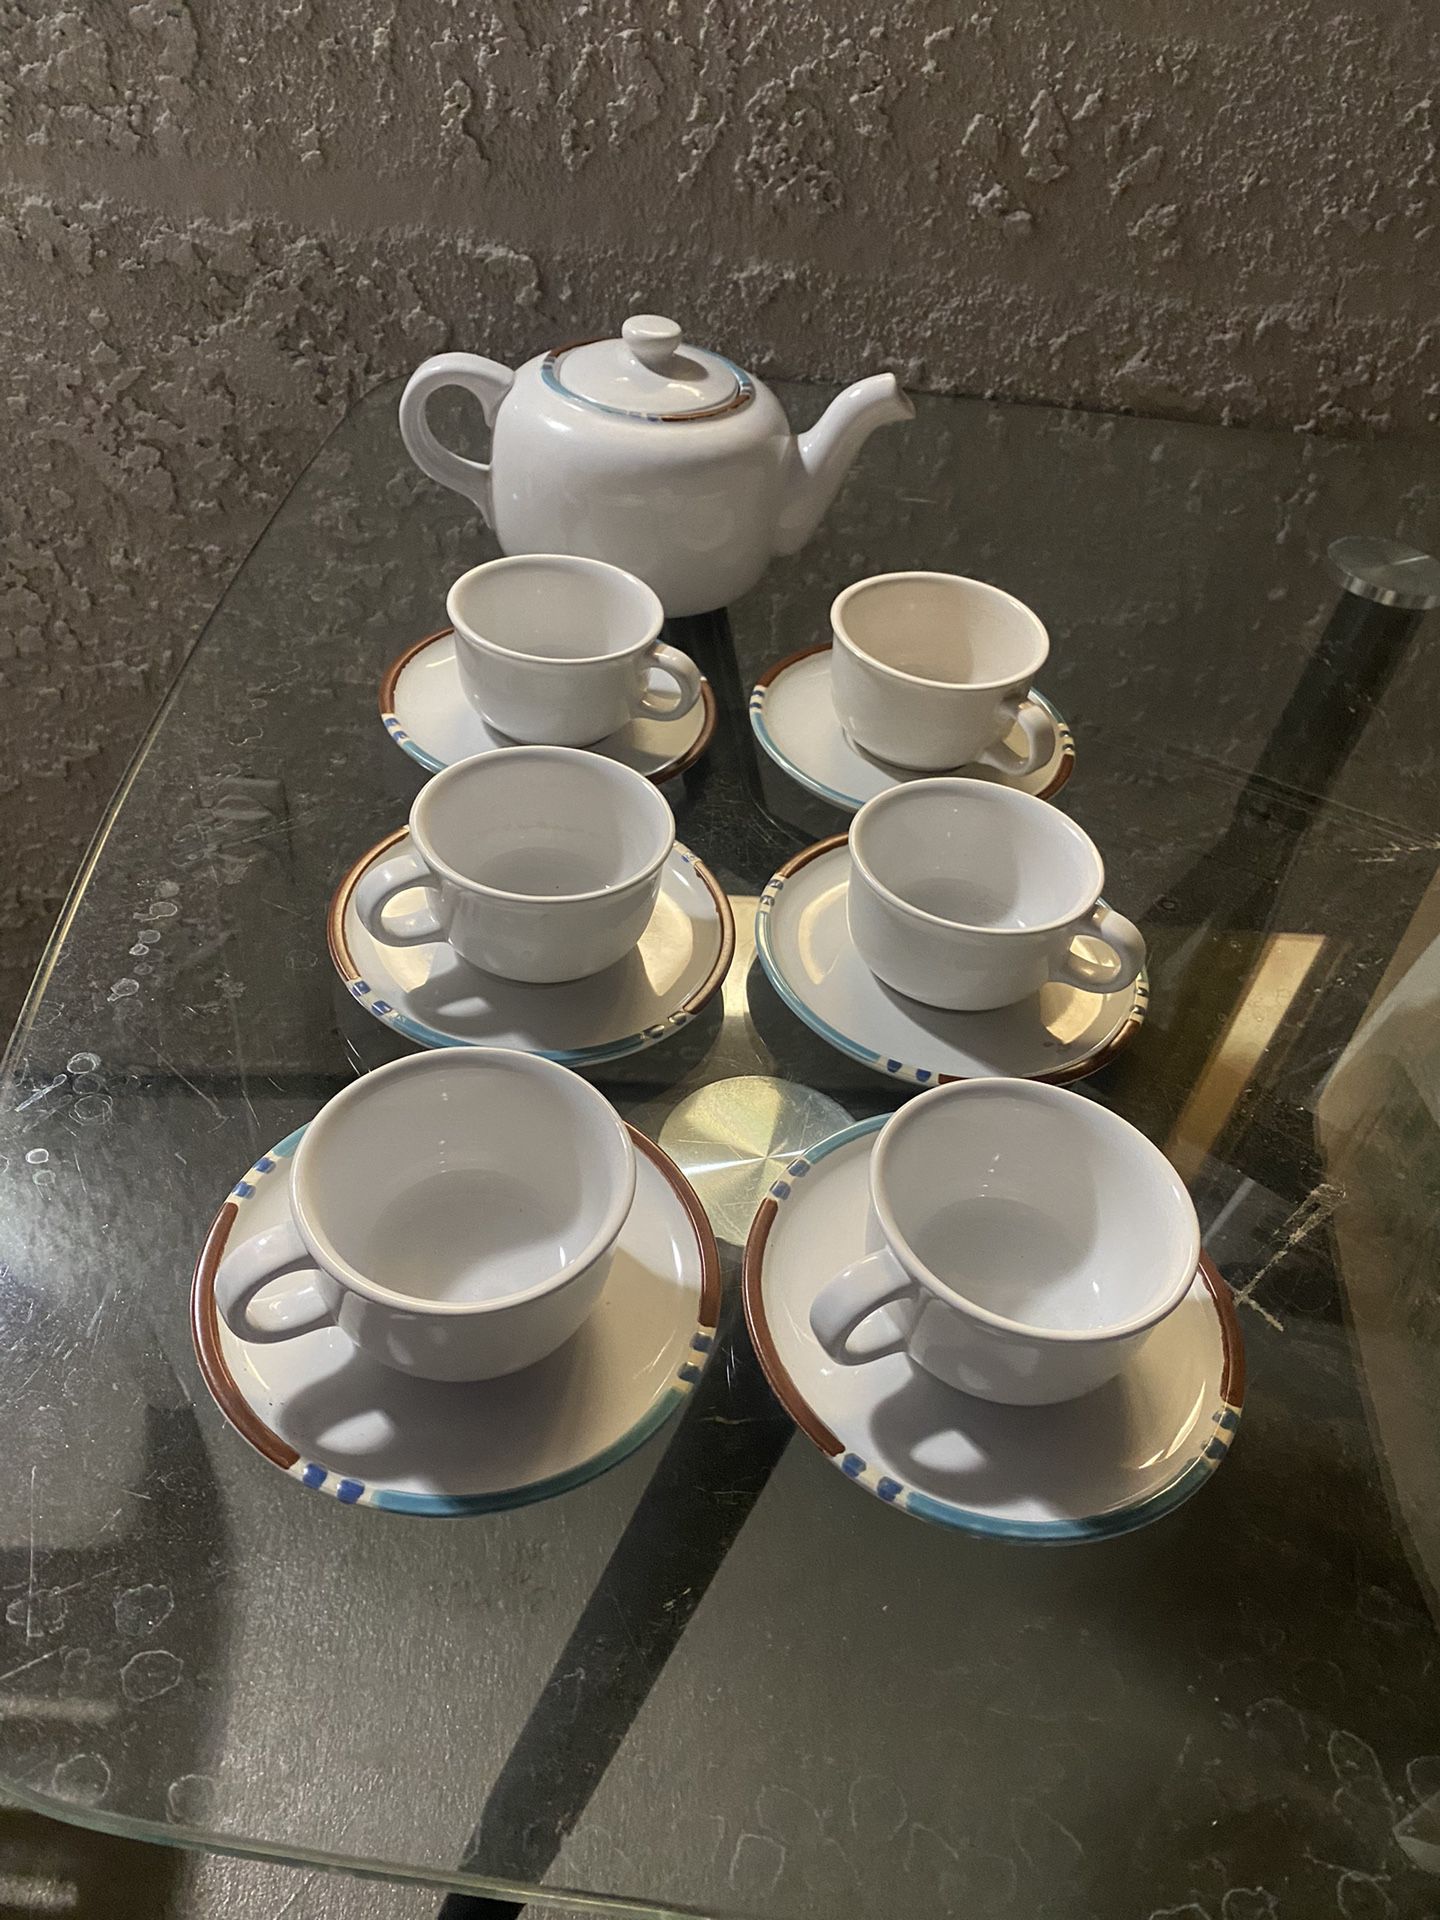 Porcelain Teapot And 60 Cup